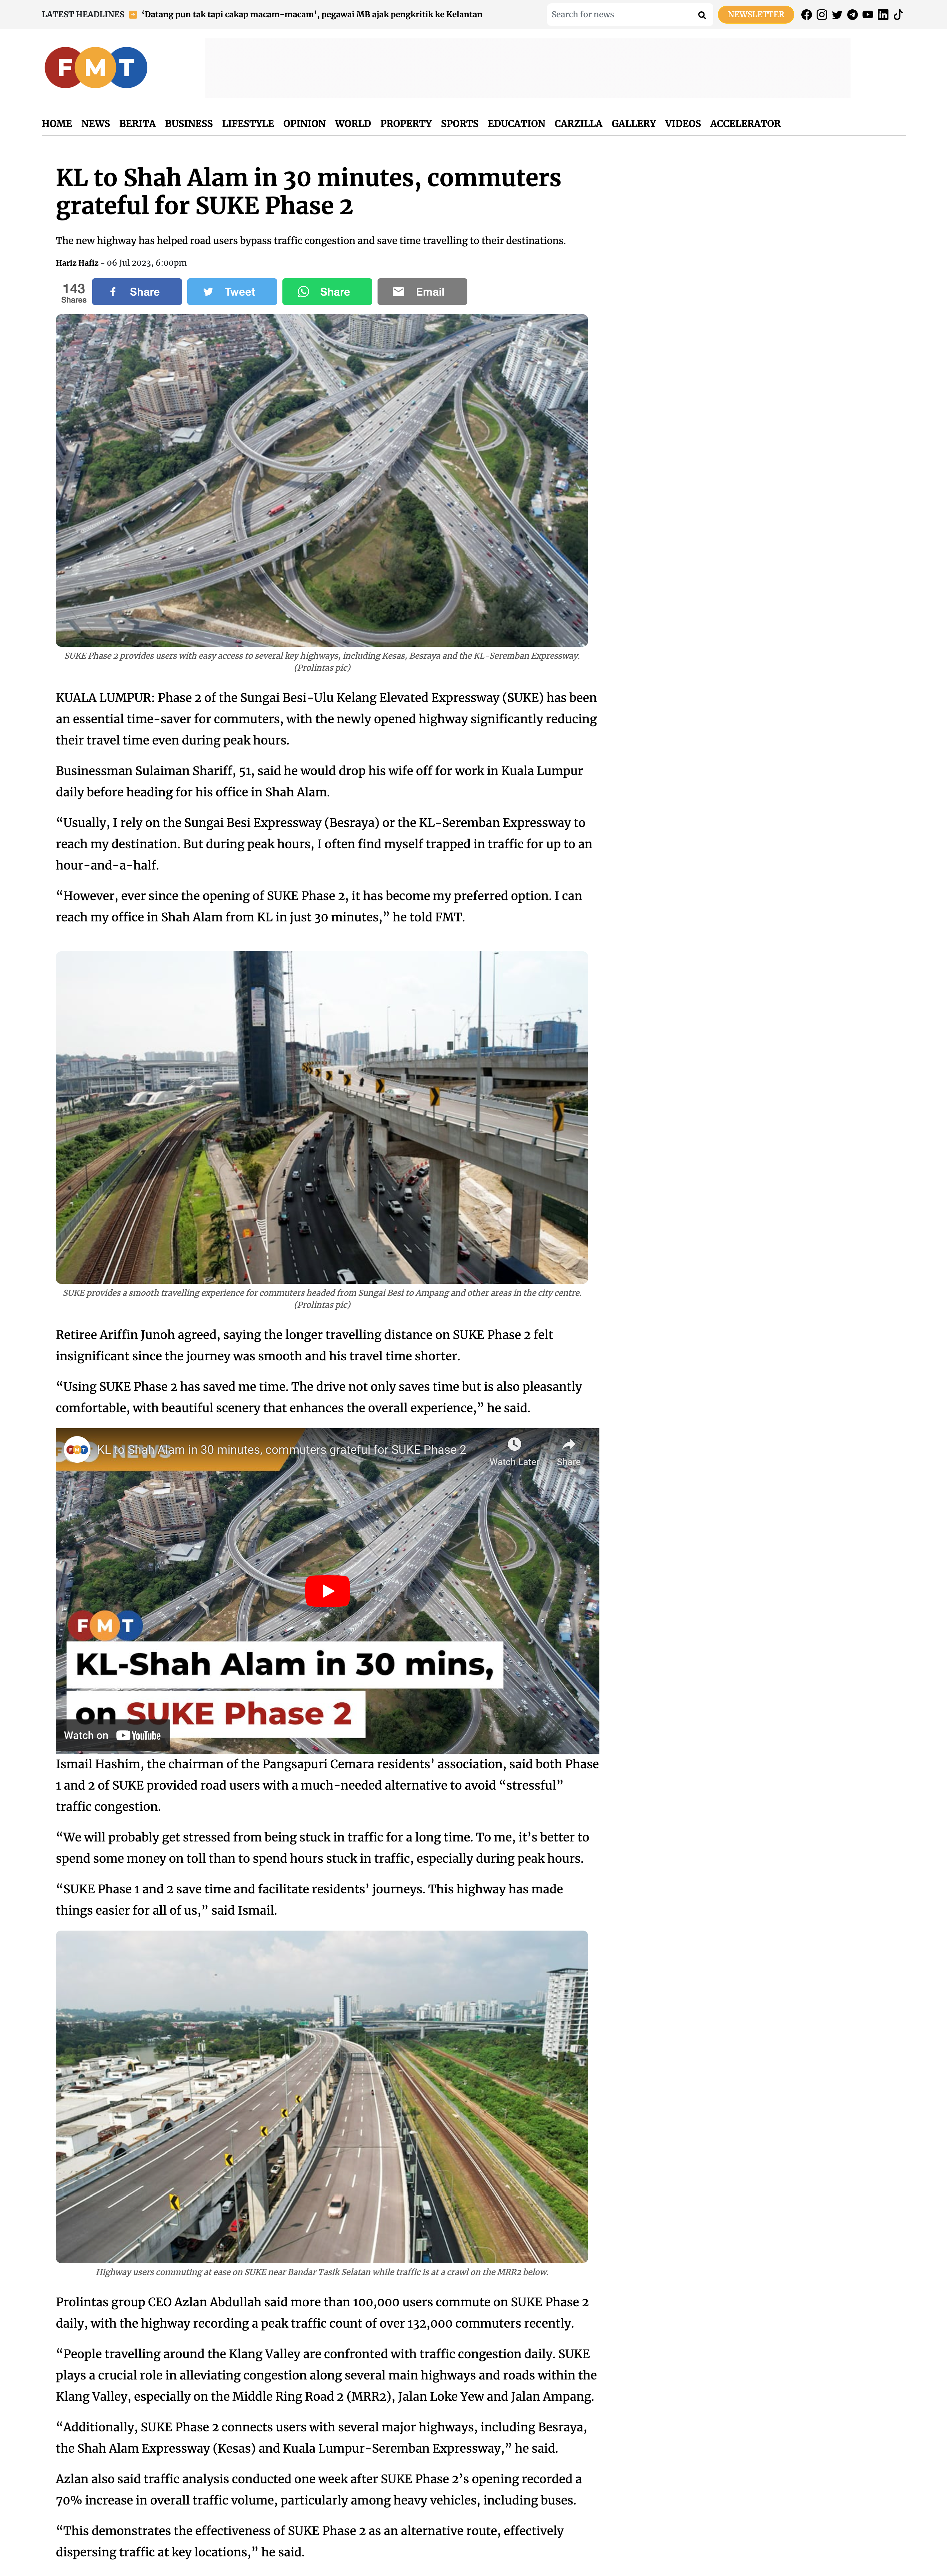 FREE MALAYSIA TODAY | KL TO SHAH ALAM IN 30 MINUTES, COMMUTERS GRATEFUL FOR SUKE PHASE 2